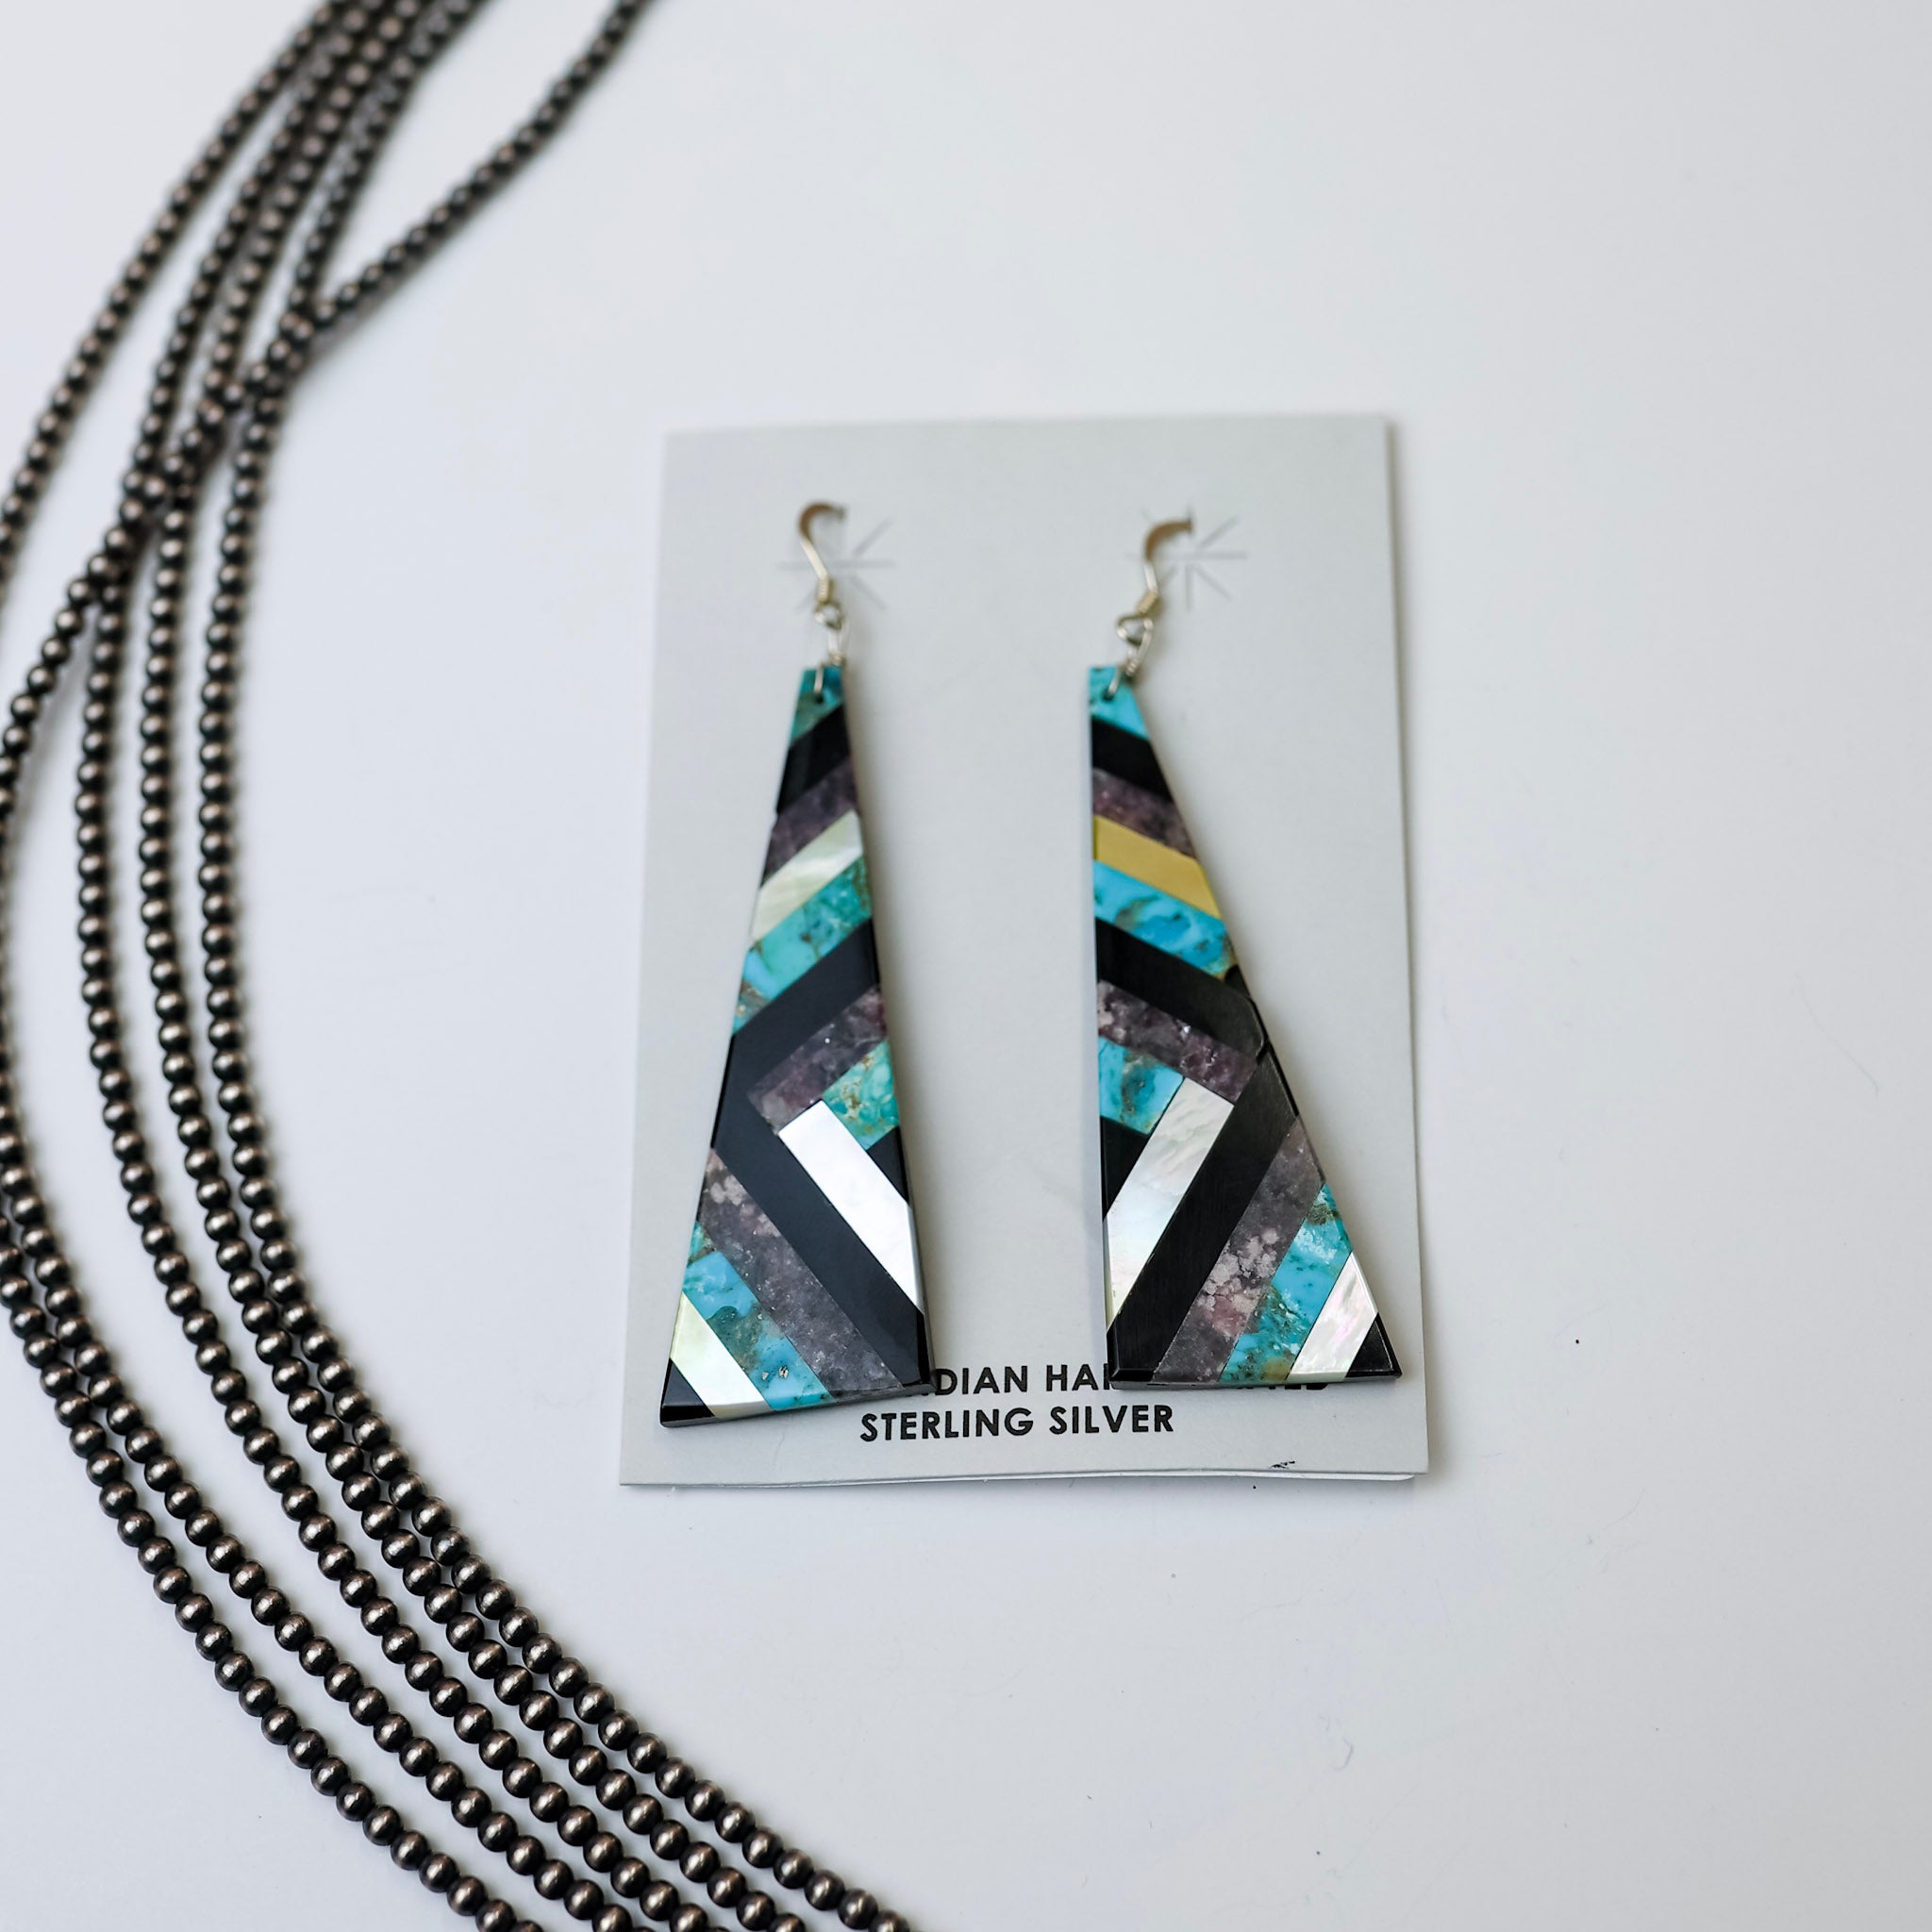 Navajo Handmade Turquoise, Opal, and Onyx Geometric Design Slab Earrings are centered in the middle of the picture. On the left side, Navajo pearls are laid. All on a white background.  